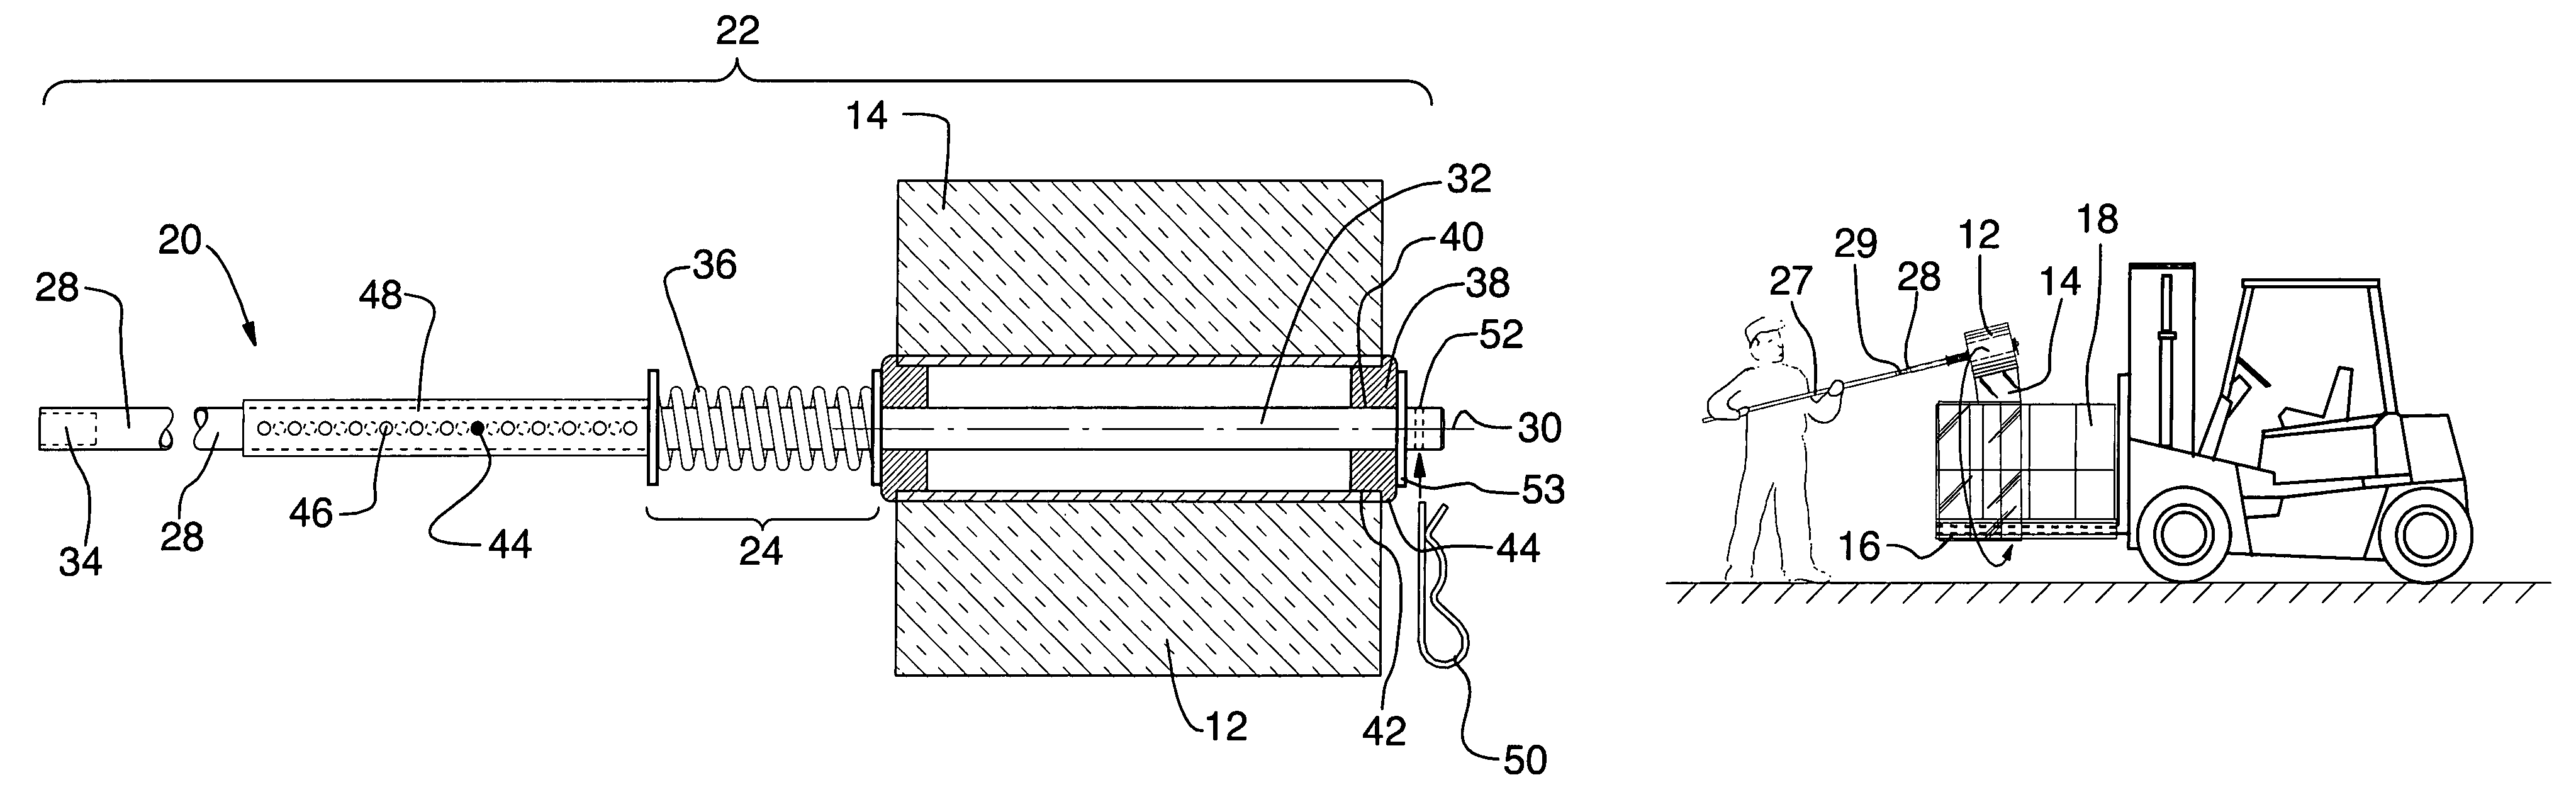 Apparatus and method for dispensing stretch wrap